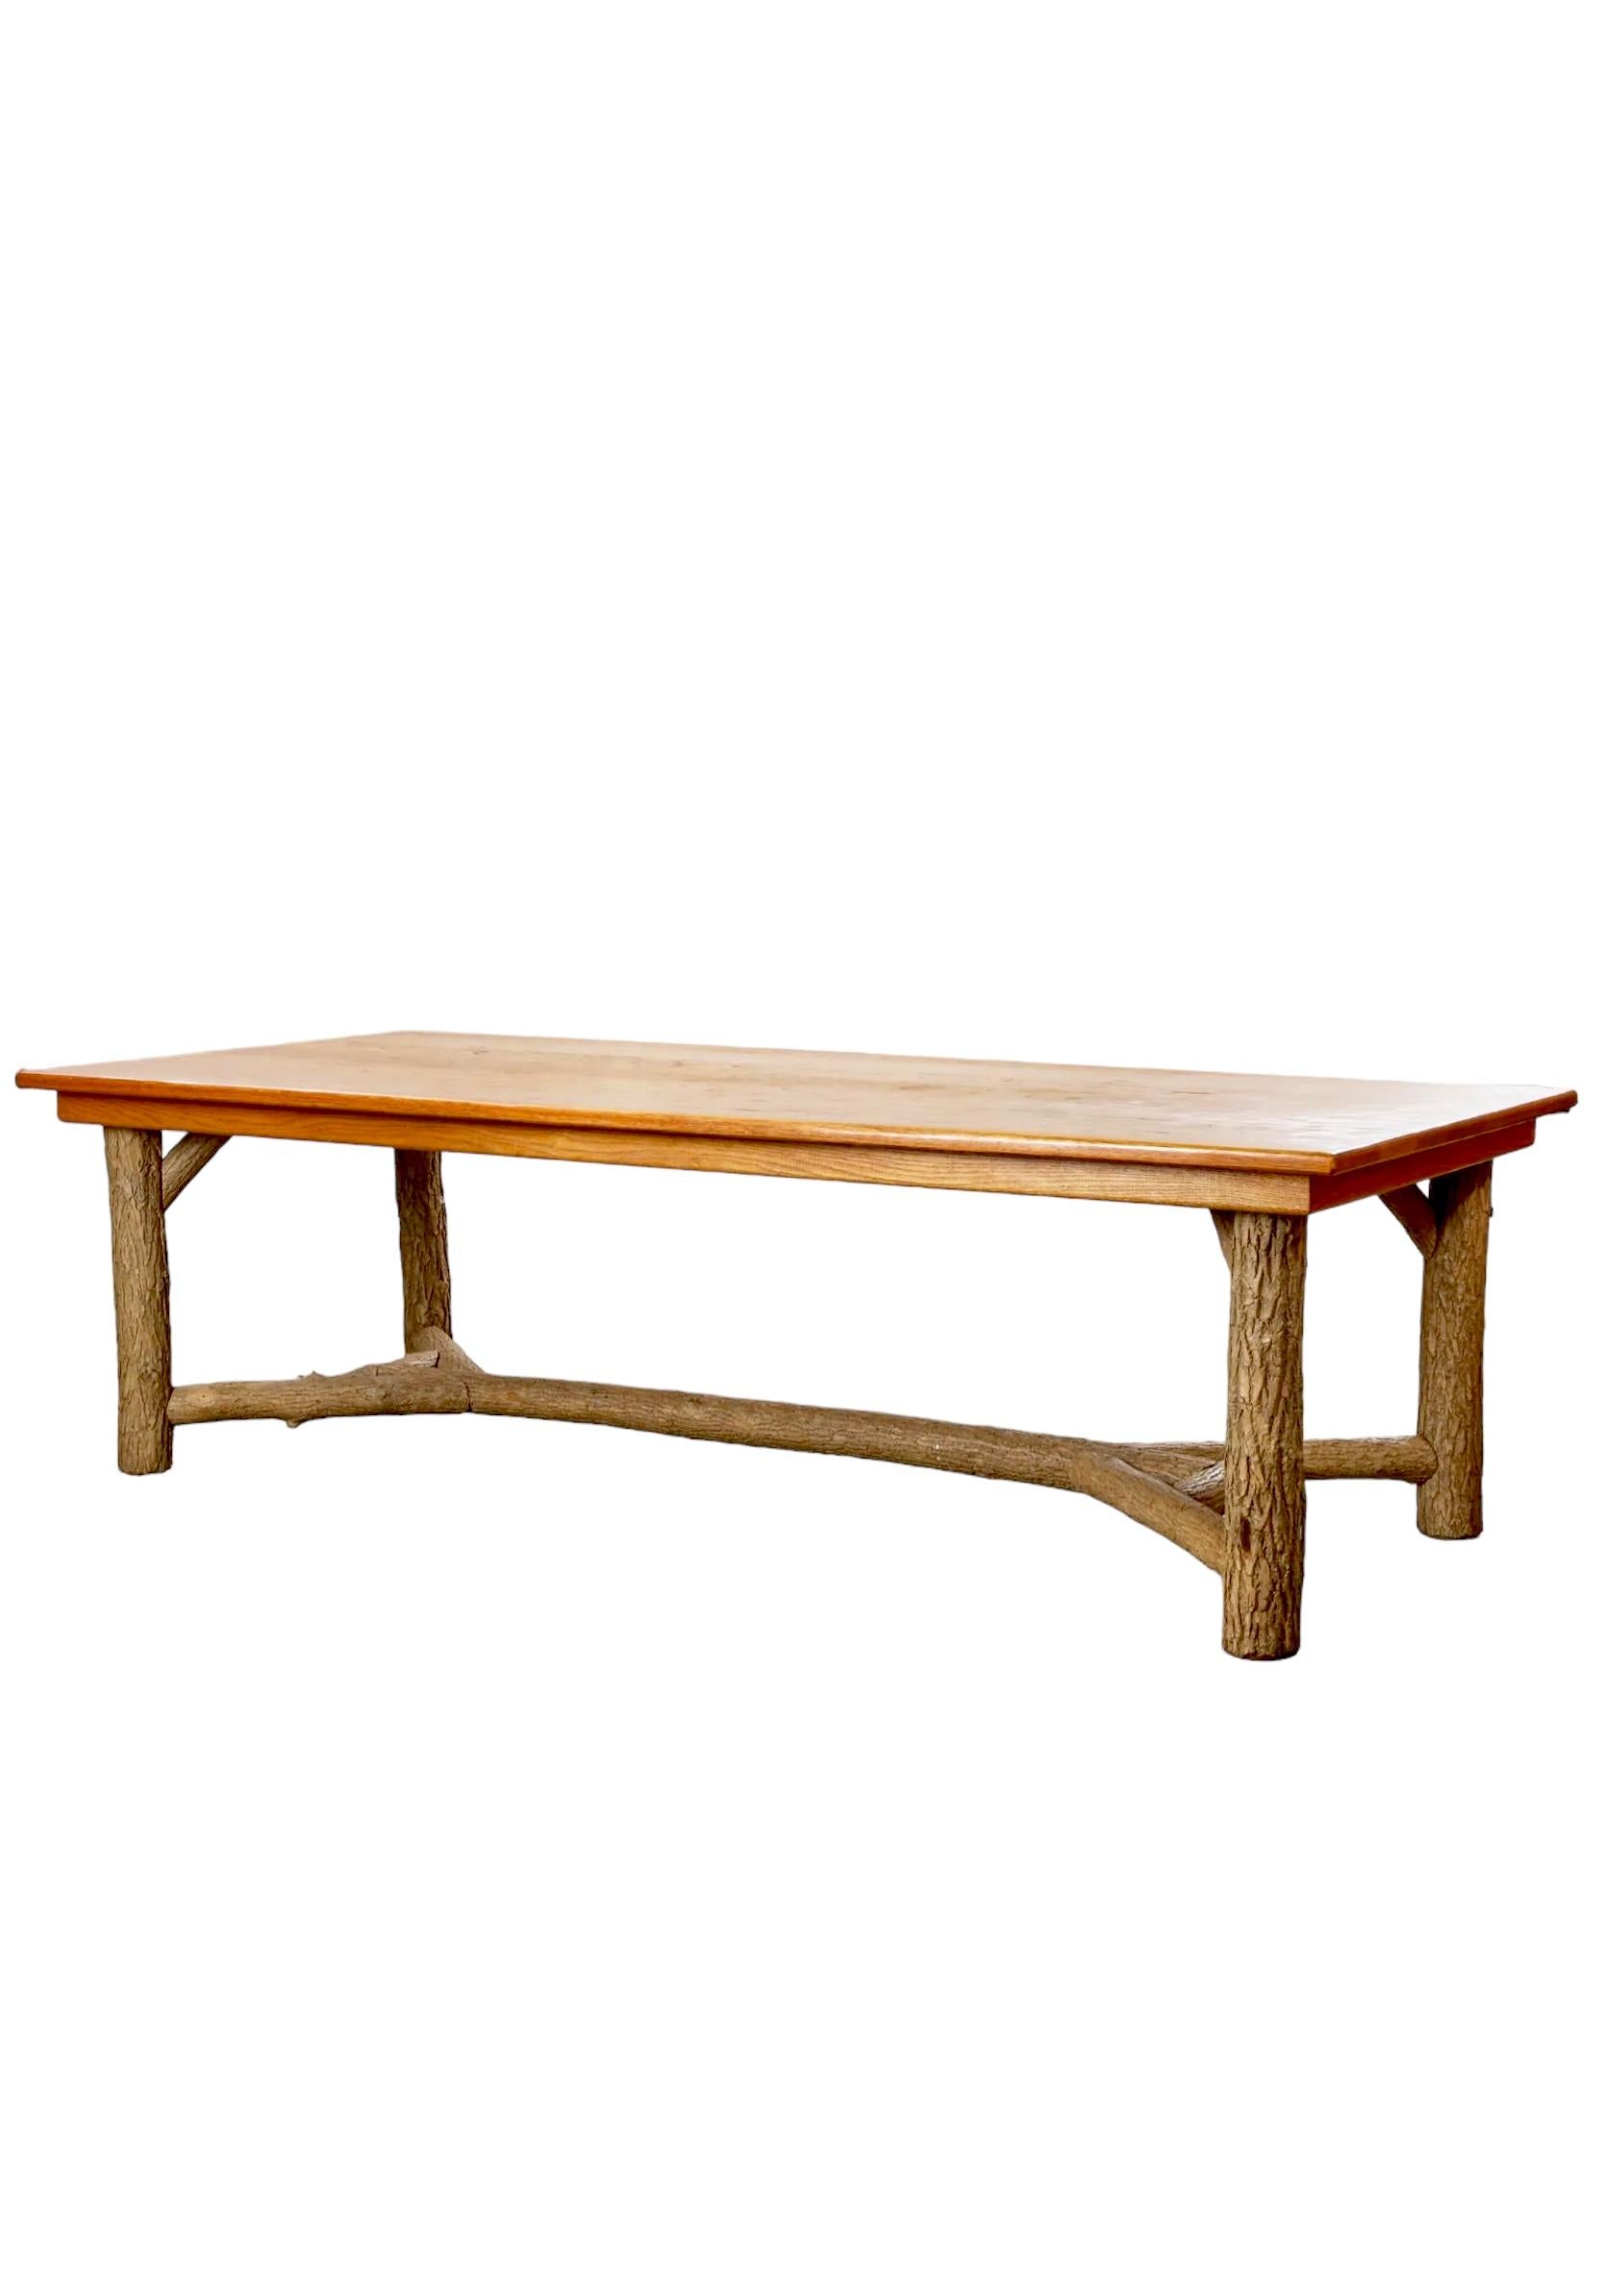 20th Century Rustic Or Primitive Faux Bois Eco-Friendly Hand Crafted La Lune Dining Table  For Sale